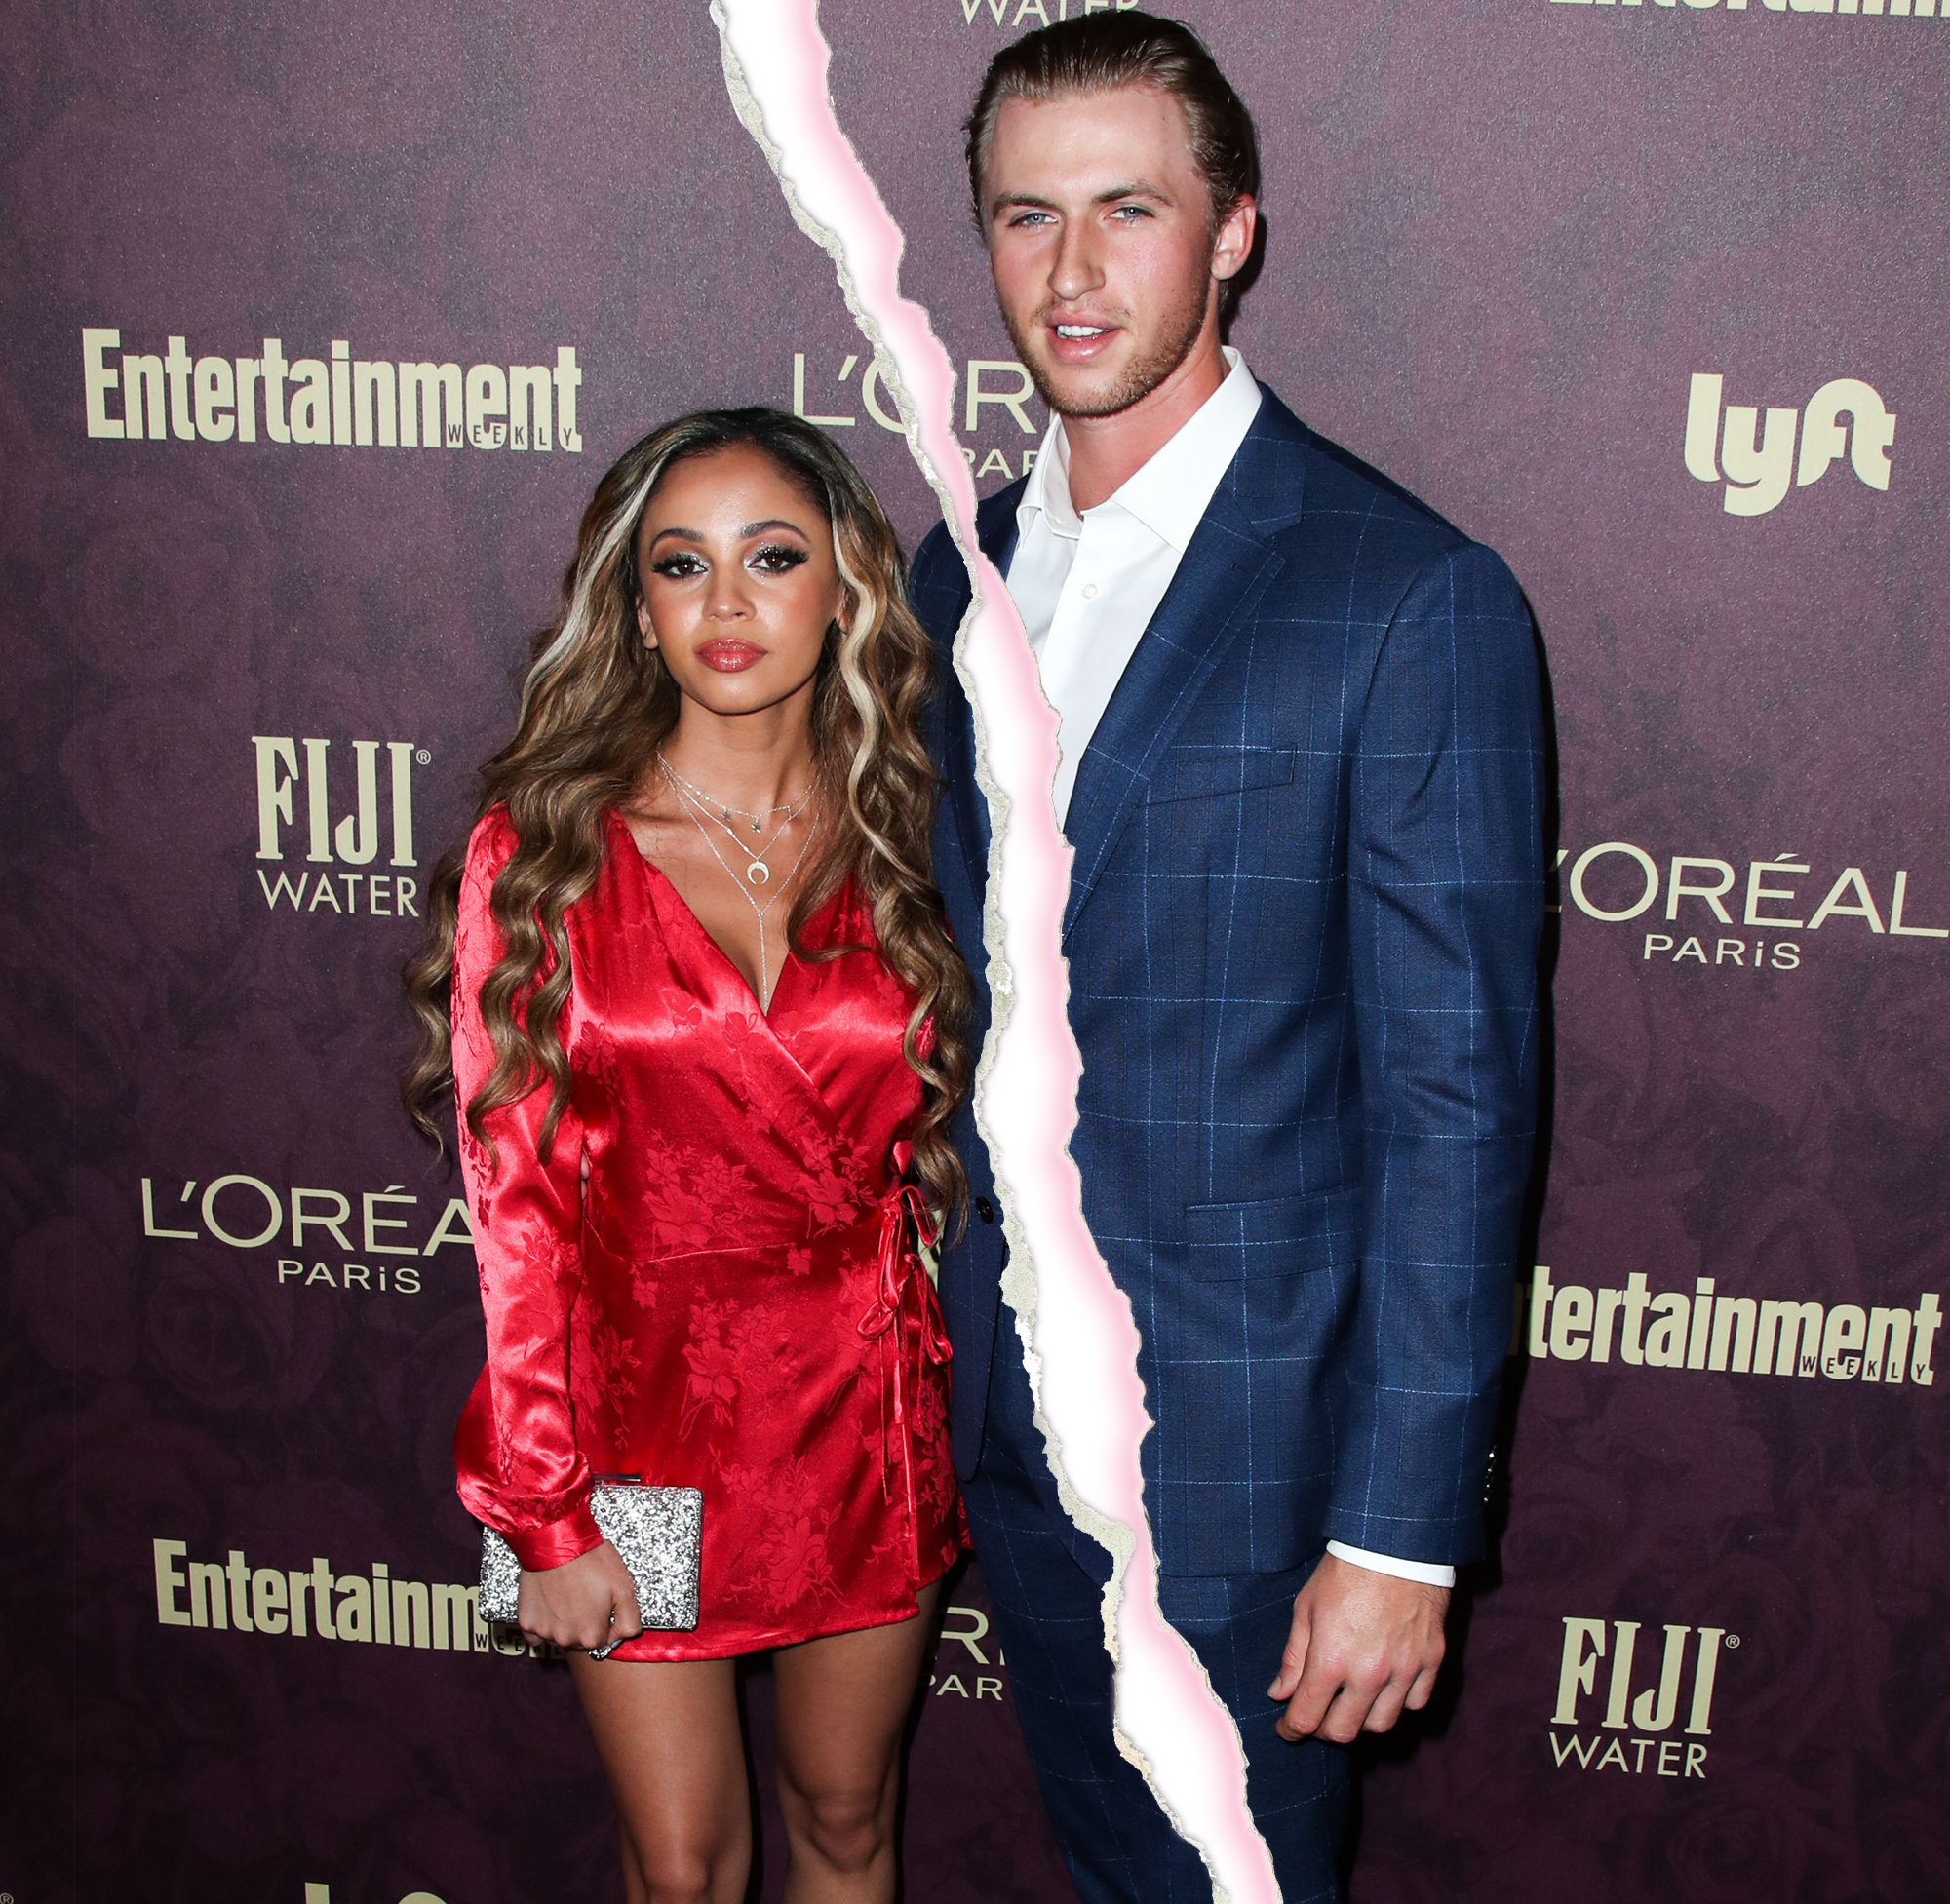 Vanessa Morgan Is Pregnant, Expecting Baby No. 1 With Michael Kopech